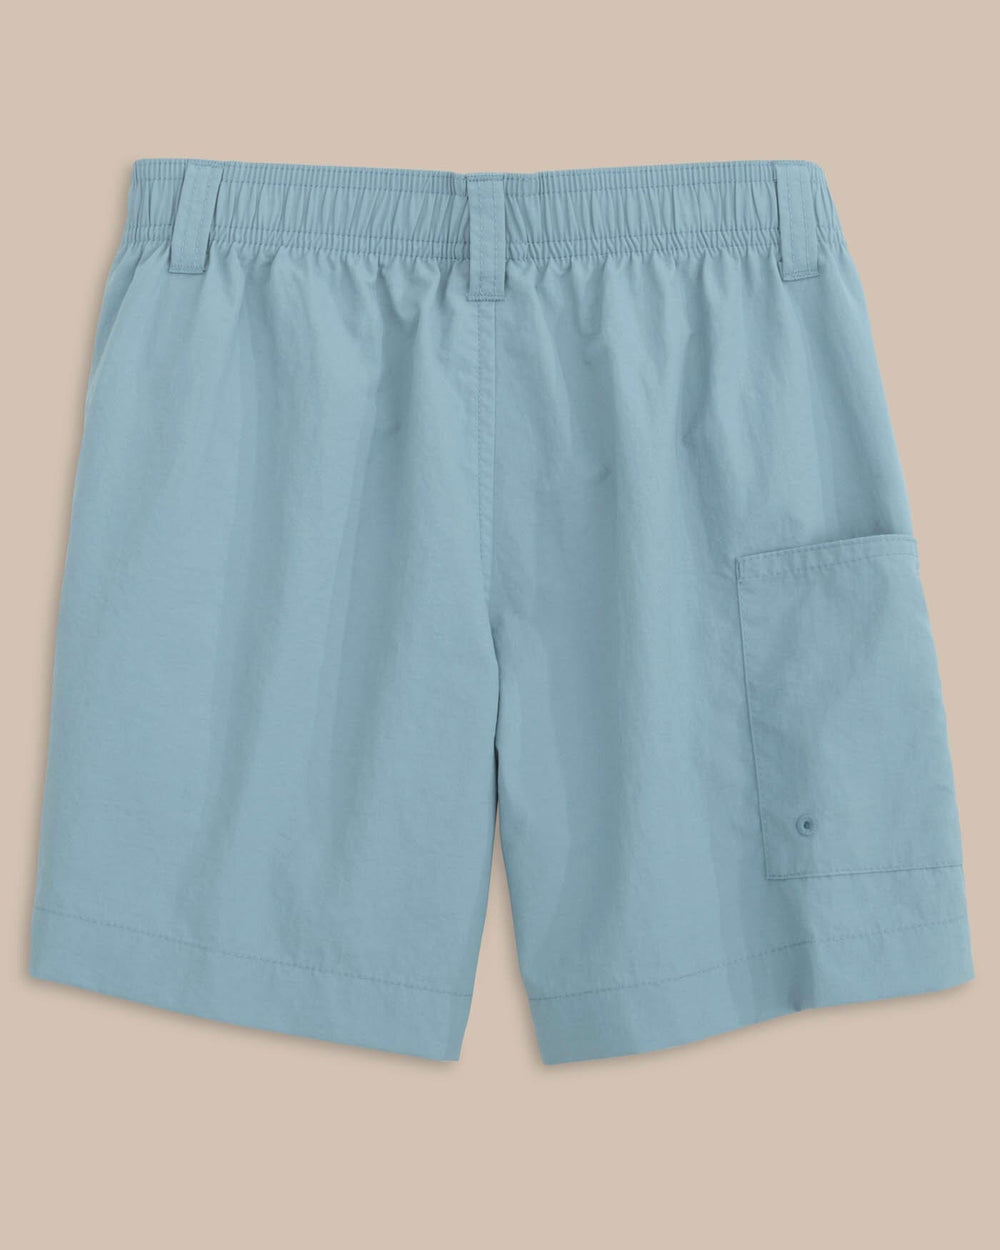 The back view of the Southern Tide Boys Shoreline Active Short by Southern Tide - Windward Blue